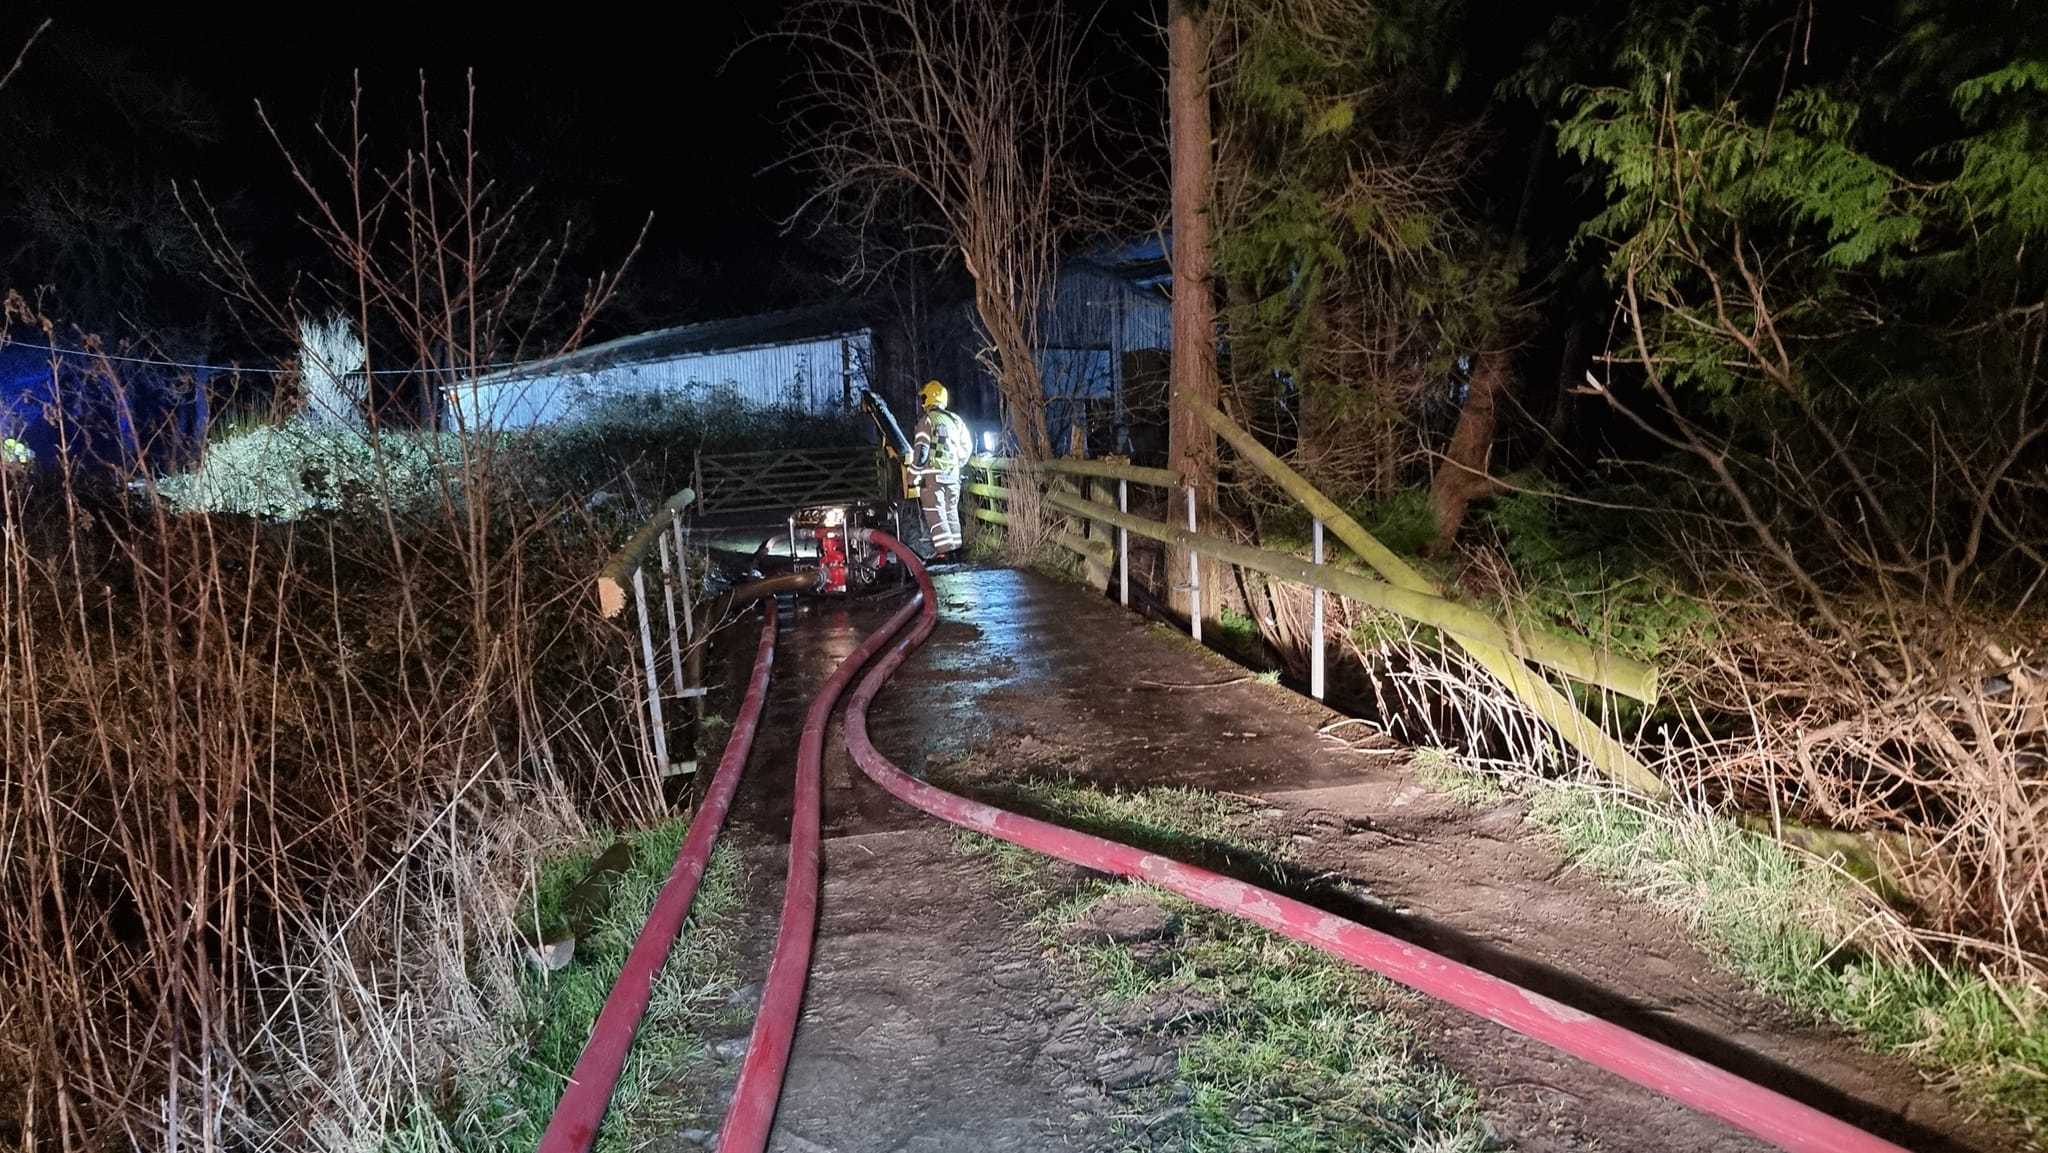 Fire crews used water from a nearby brook to battle the blaze. Picture: Kington fire station